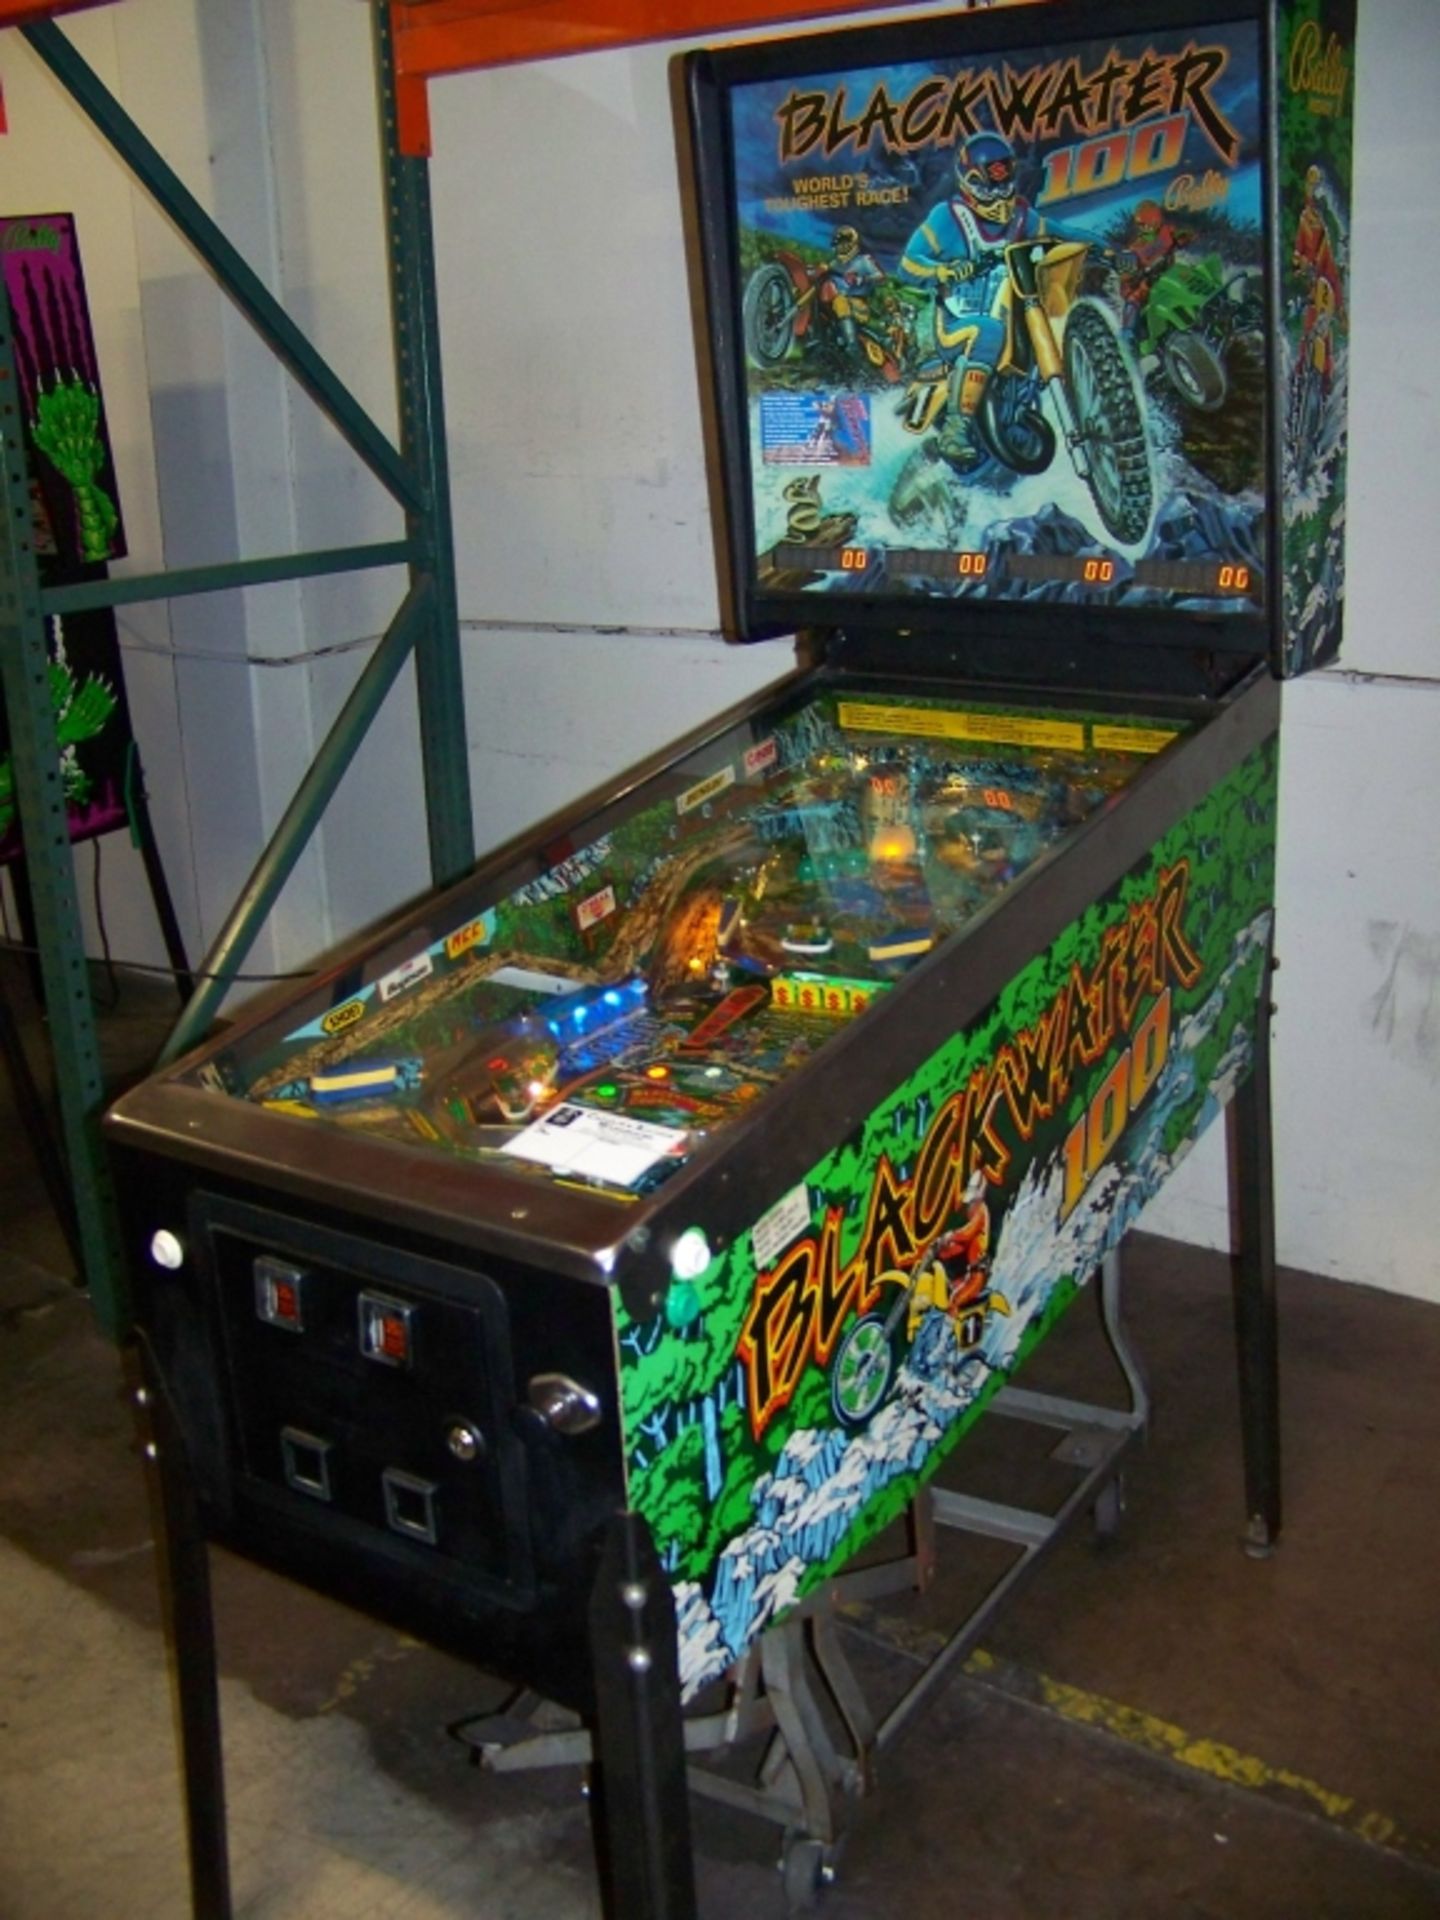 BLACKWATER 100 PINBALL MACHINE BALLY 1988 Item is in used condition. Evidence of wear and commercial - Image 2 of 10